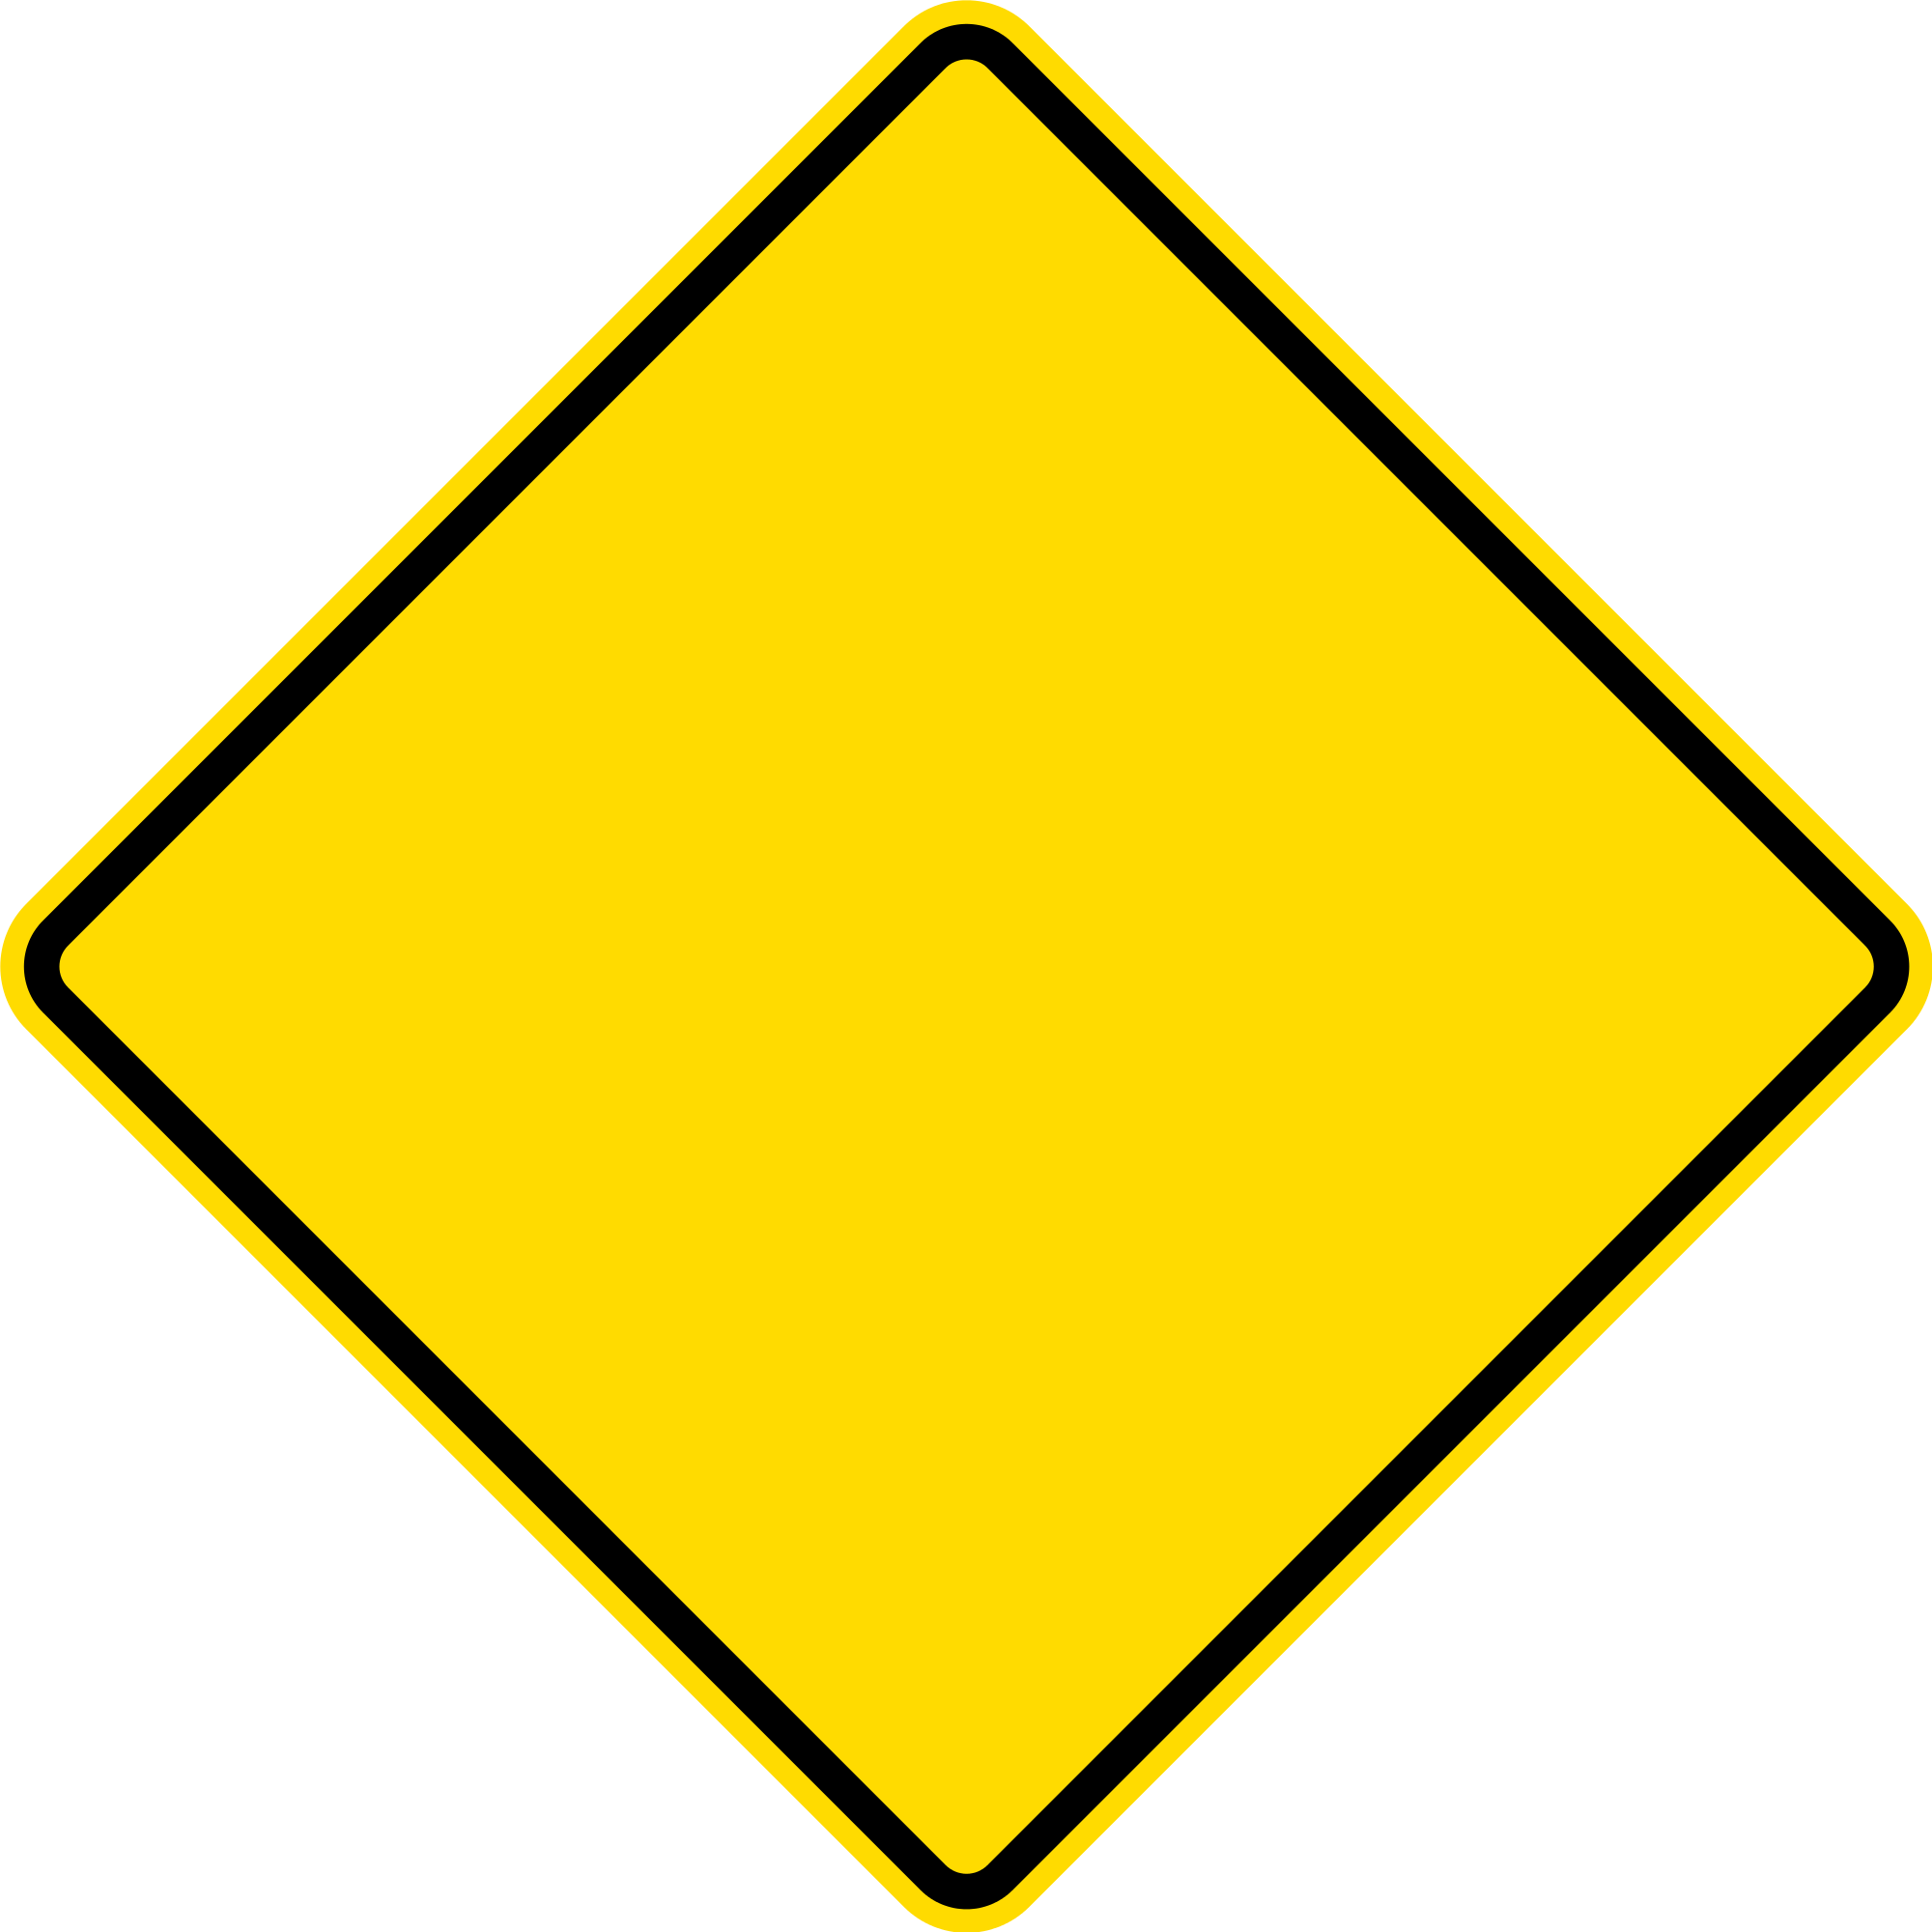 Diamond Warning Sign - Blank Yellow Sign Means (2000x2000)